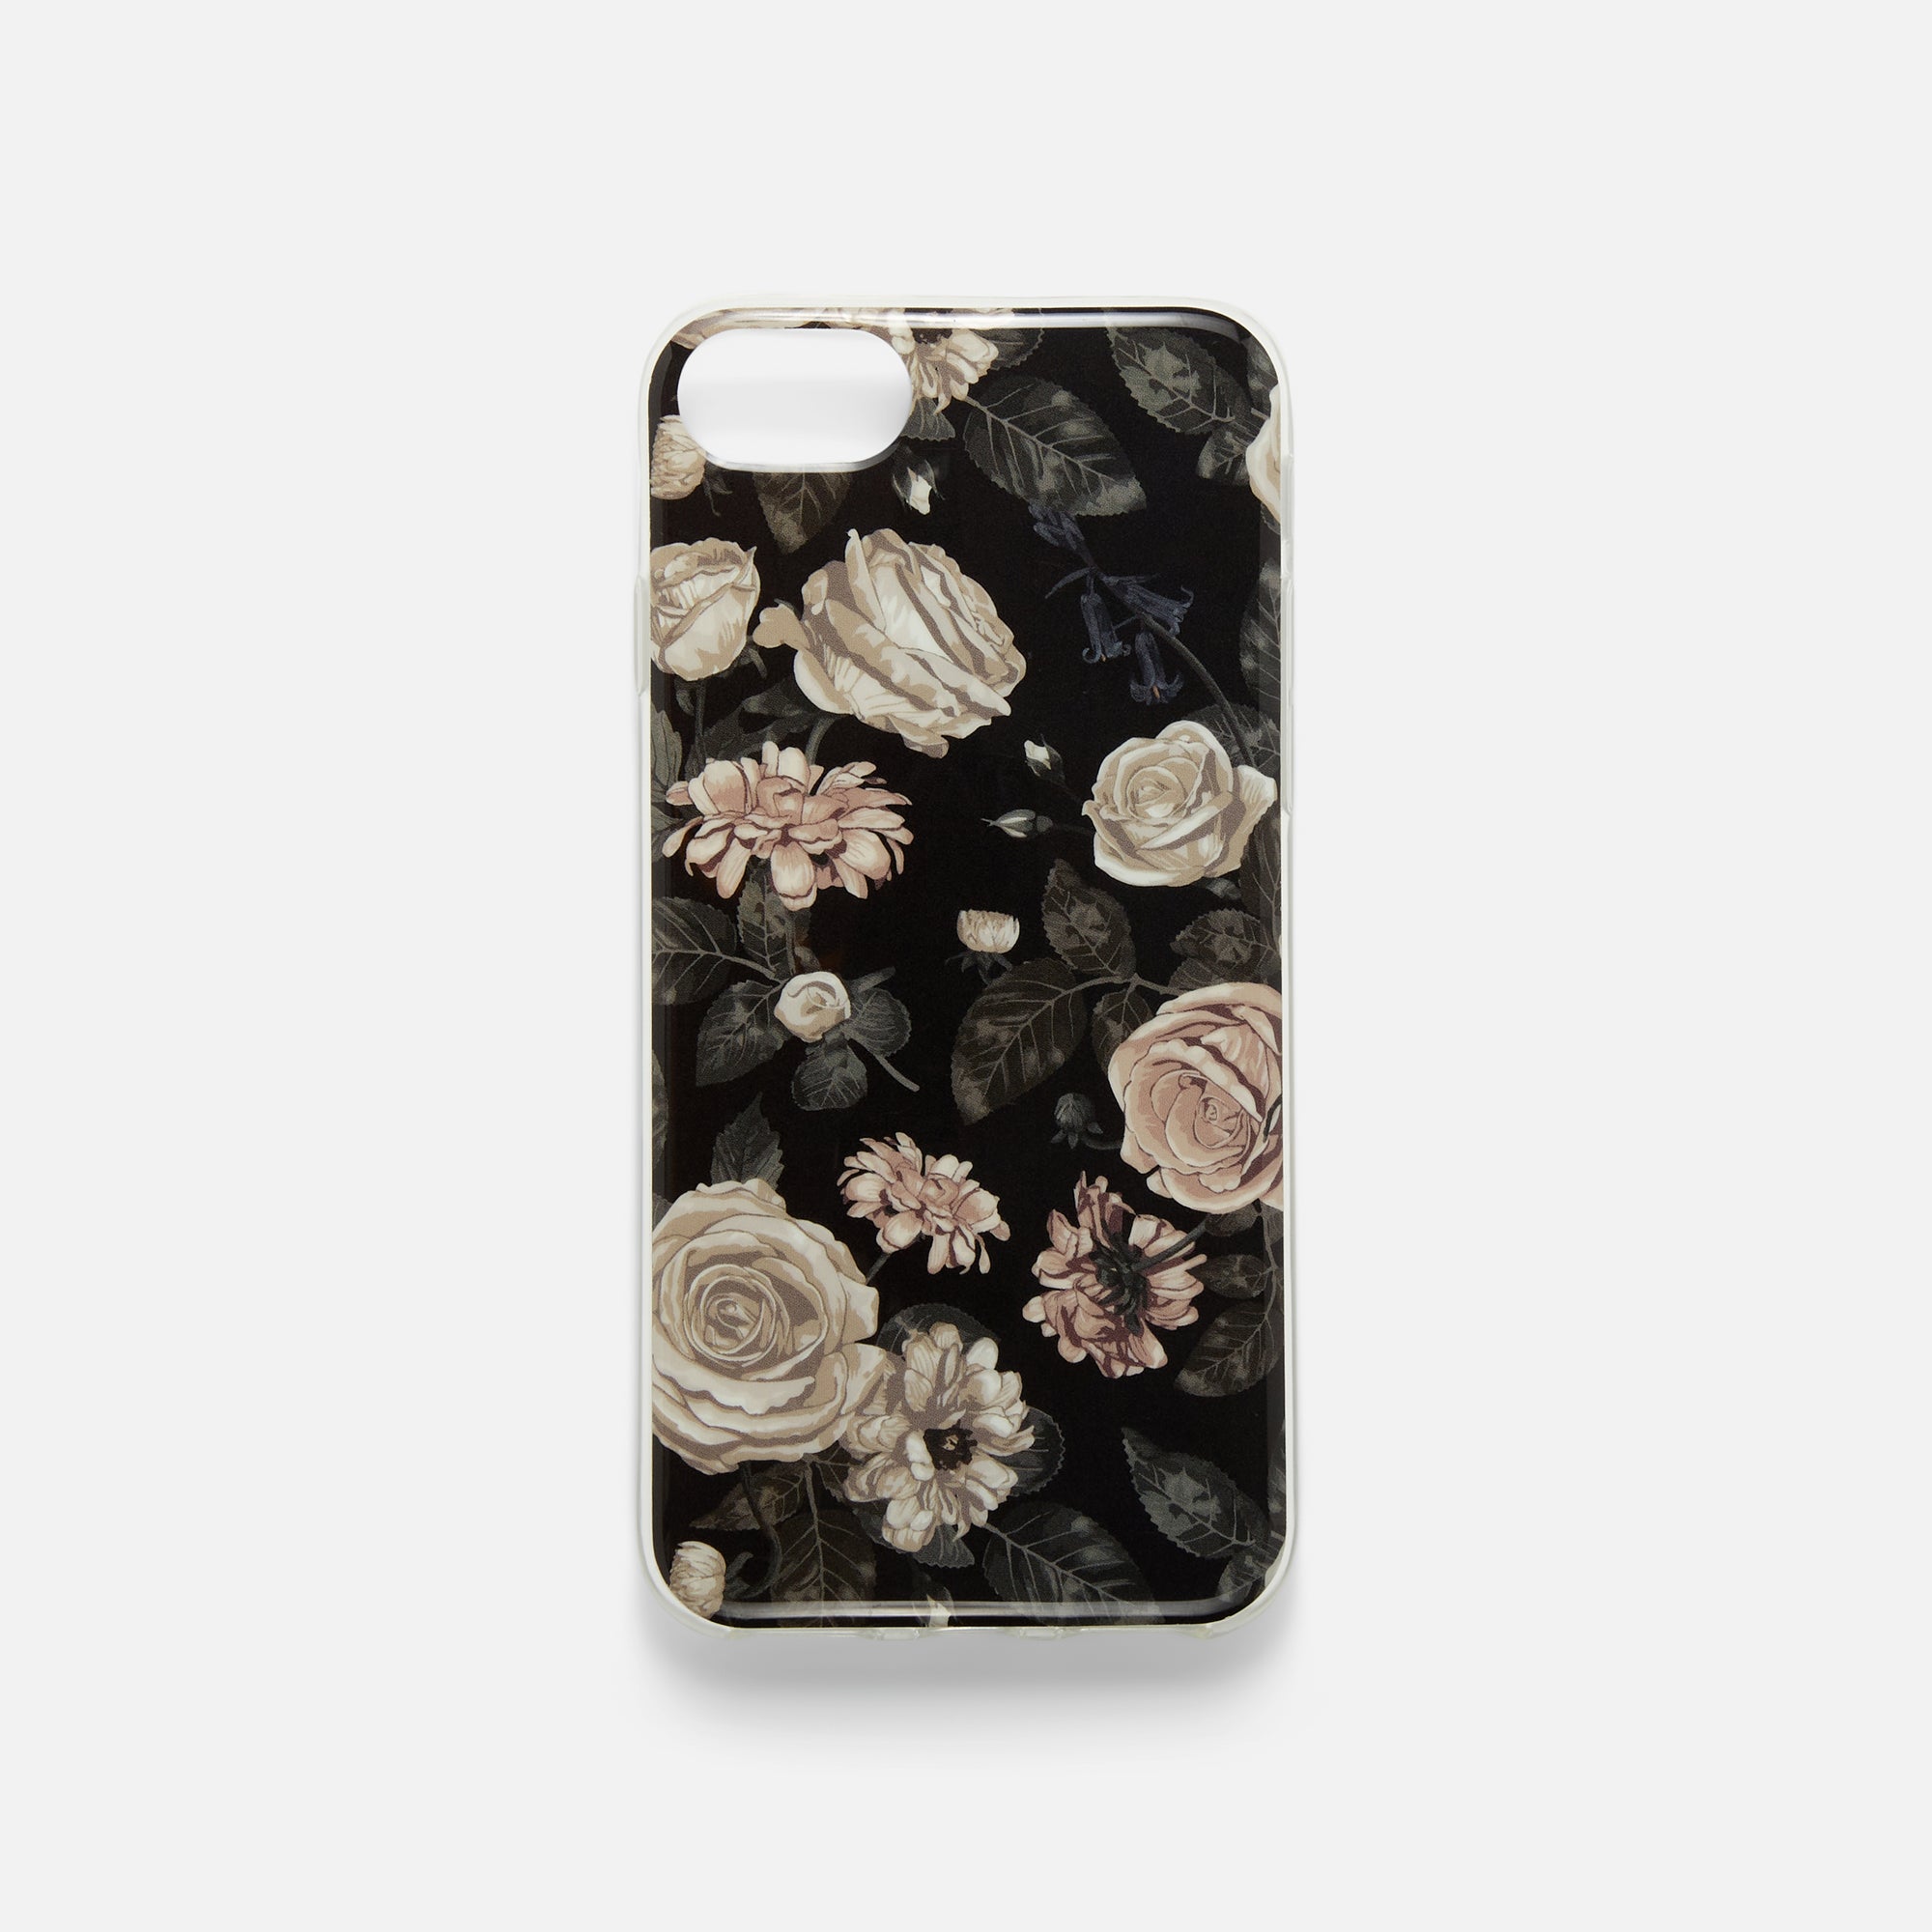 Black Iphone case with flowers